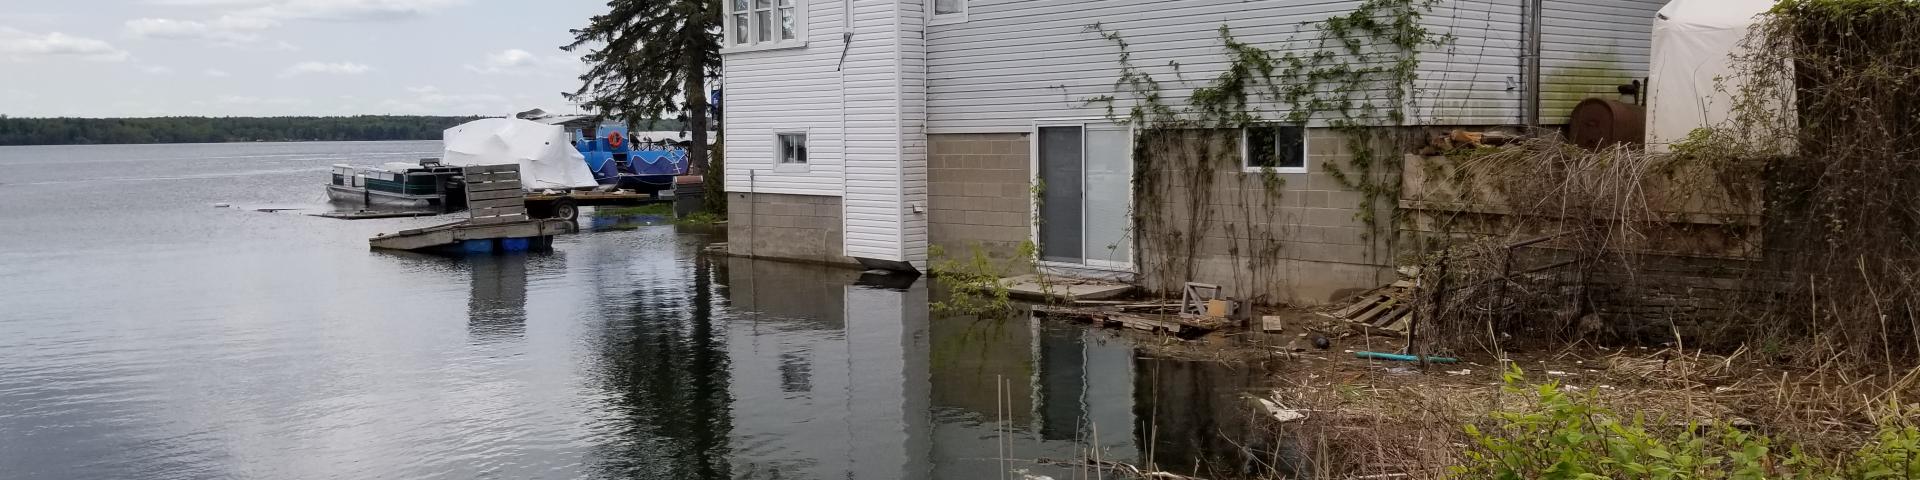 Image of house in Upper St. Lawrence River, Brockville, ON - May 27, 2019